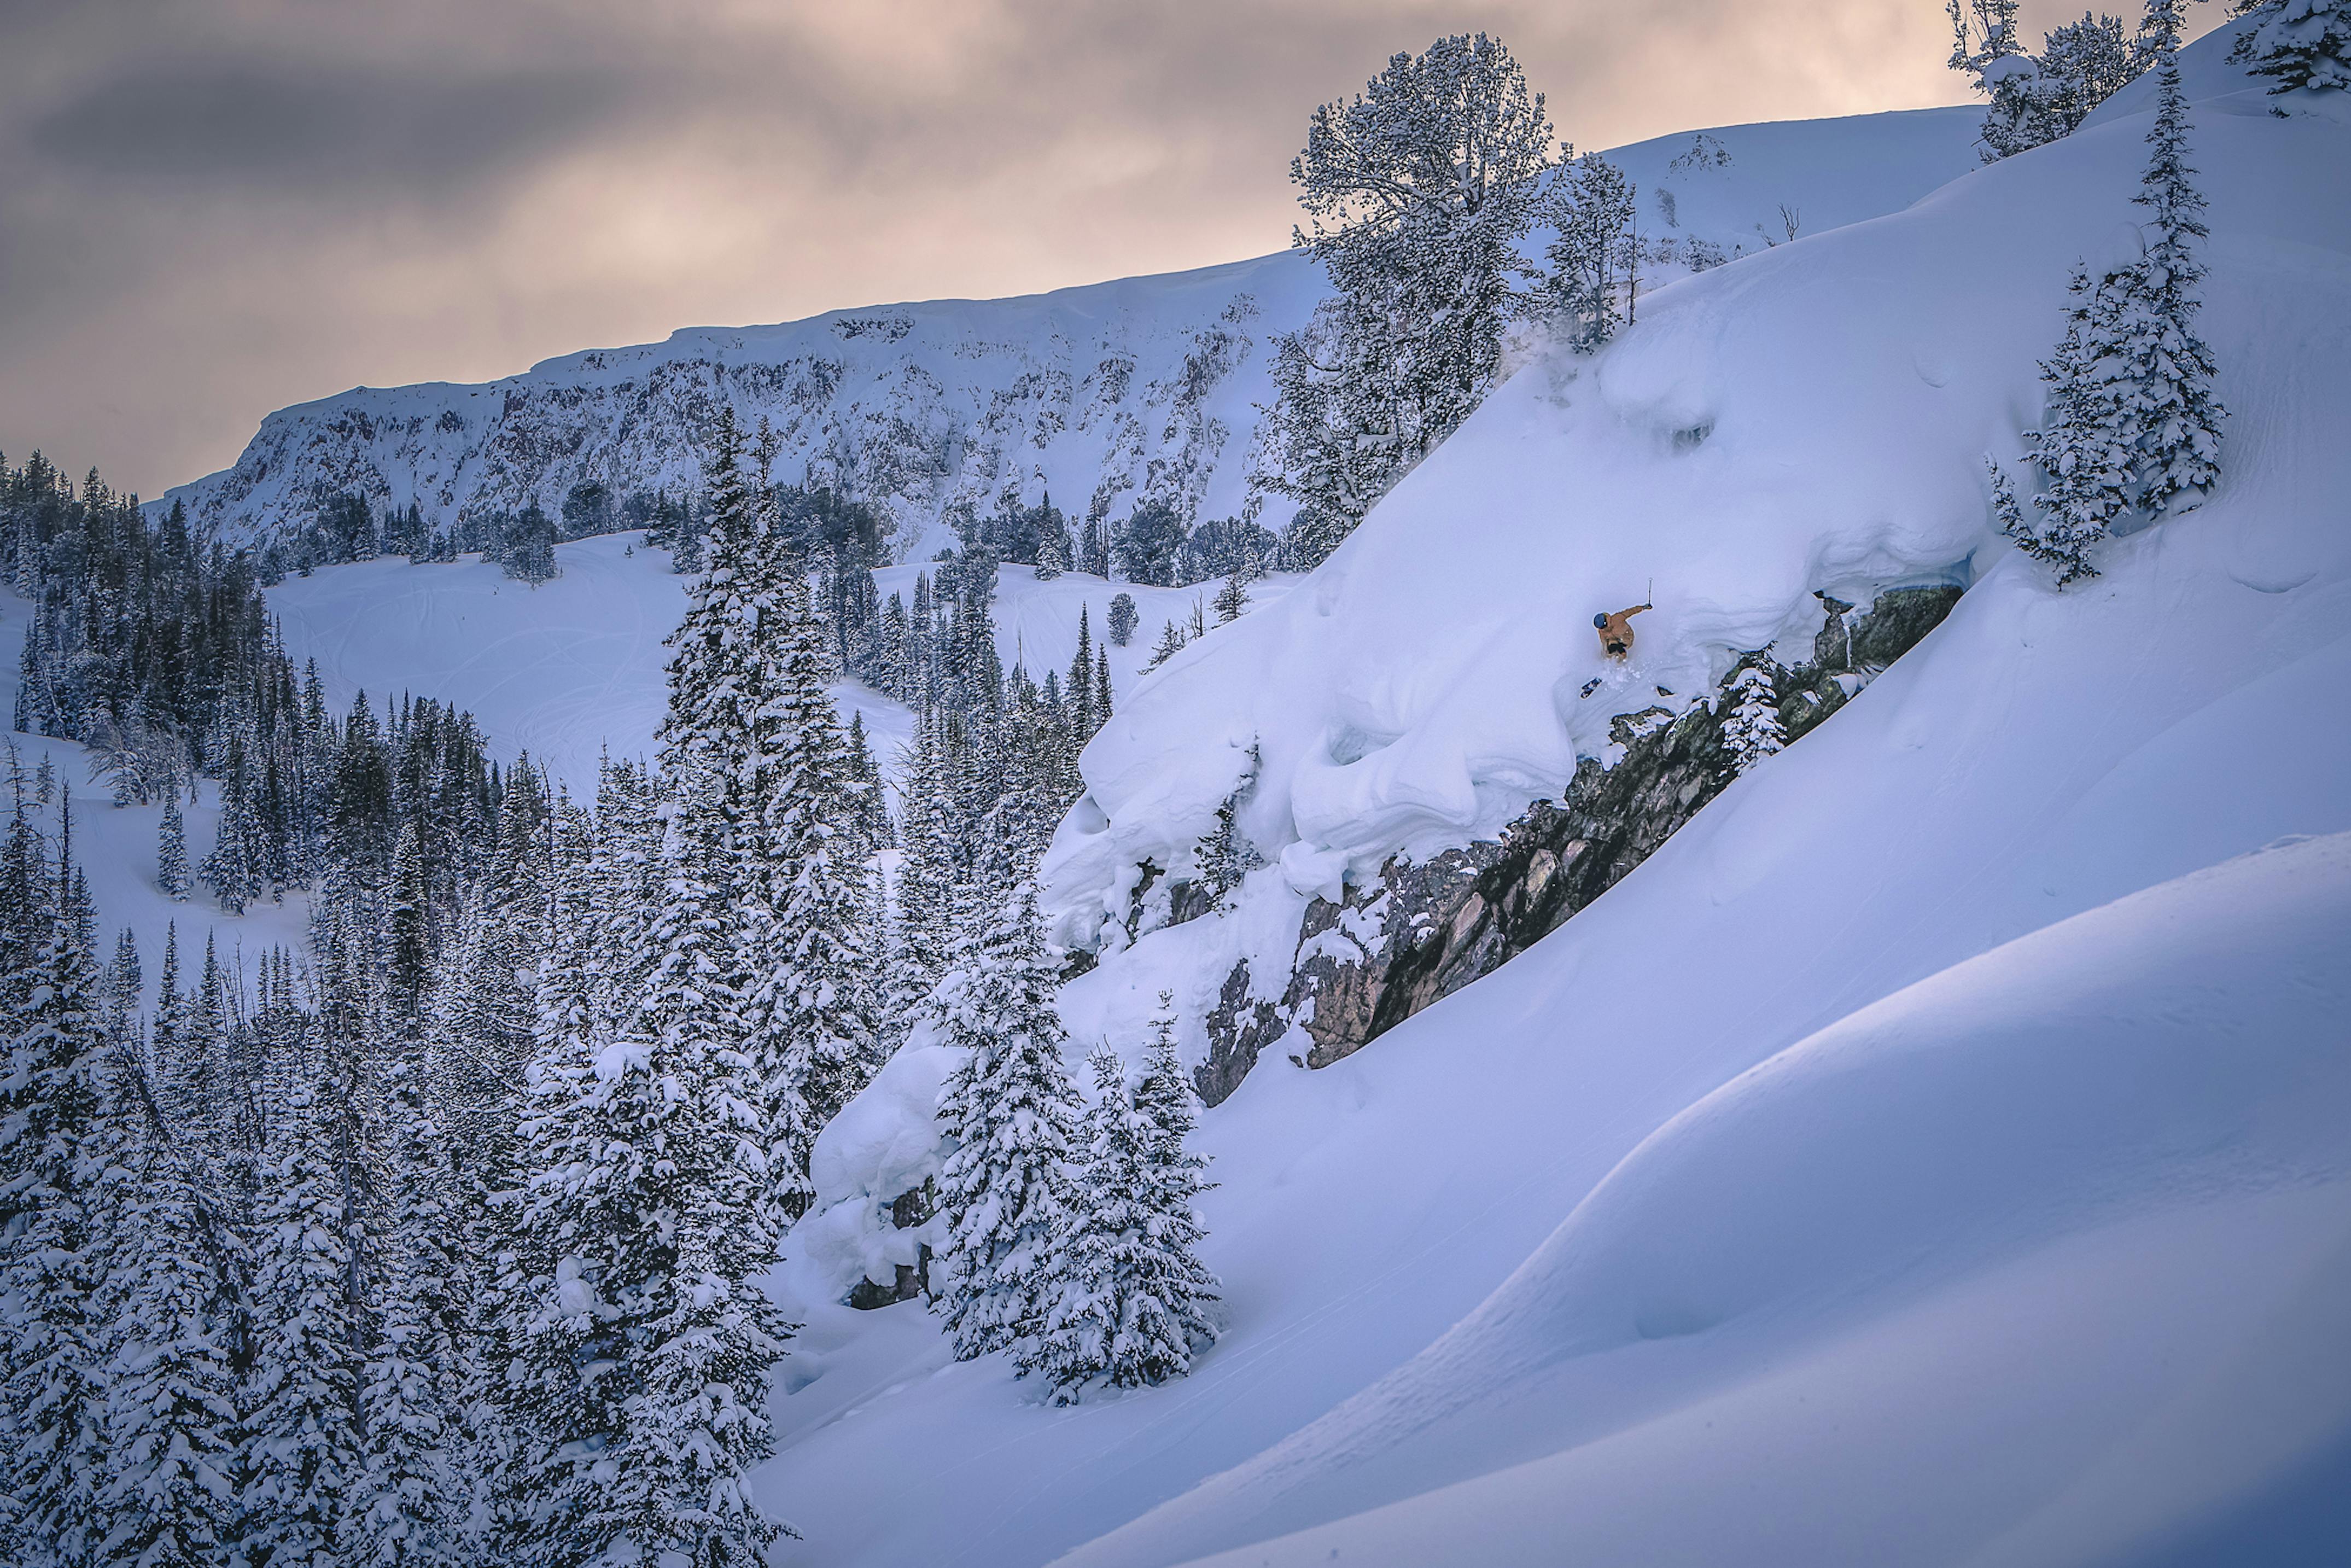 Black Diamond Athlete Parkin Costain skiing in the backcountry